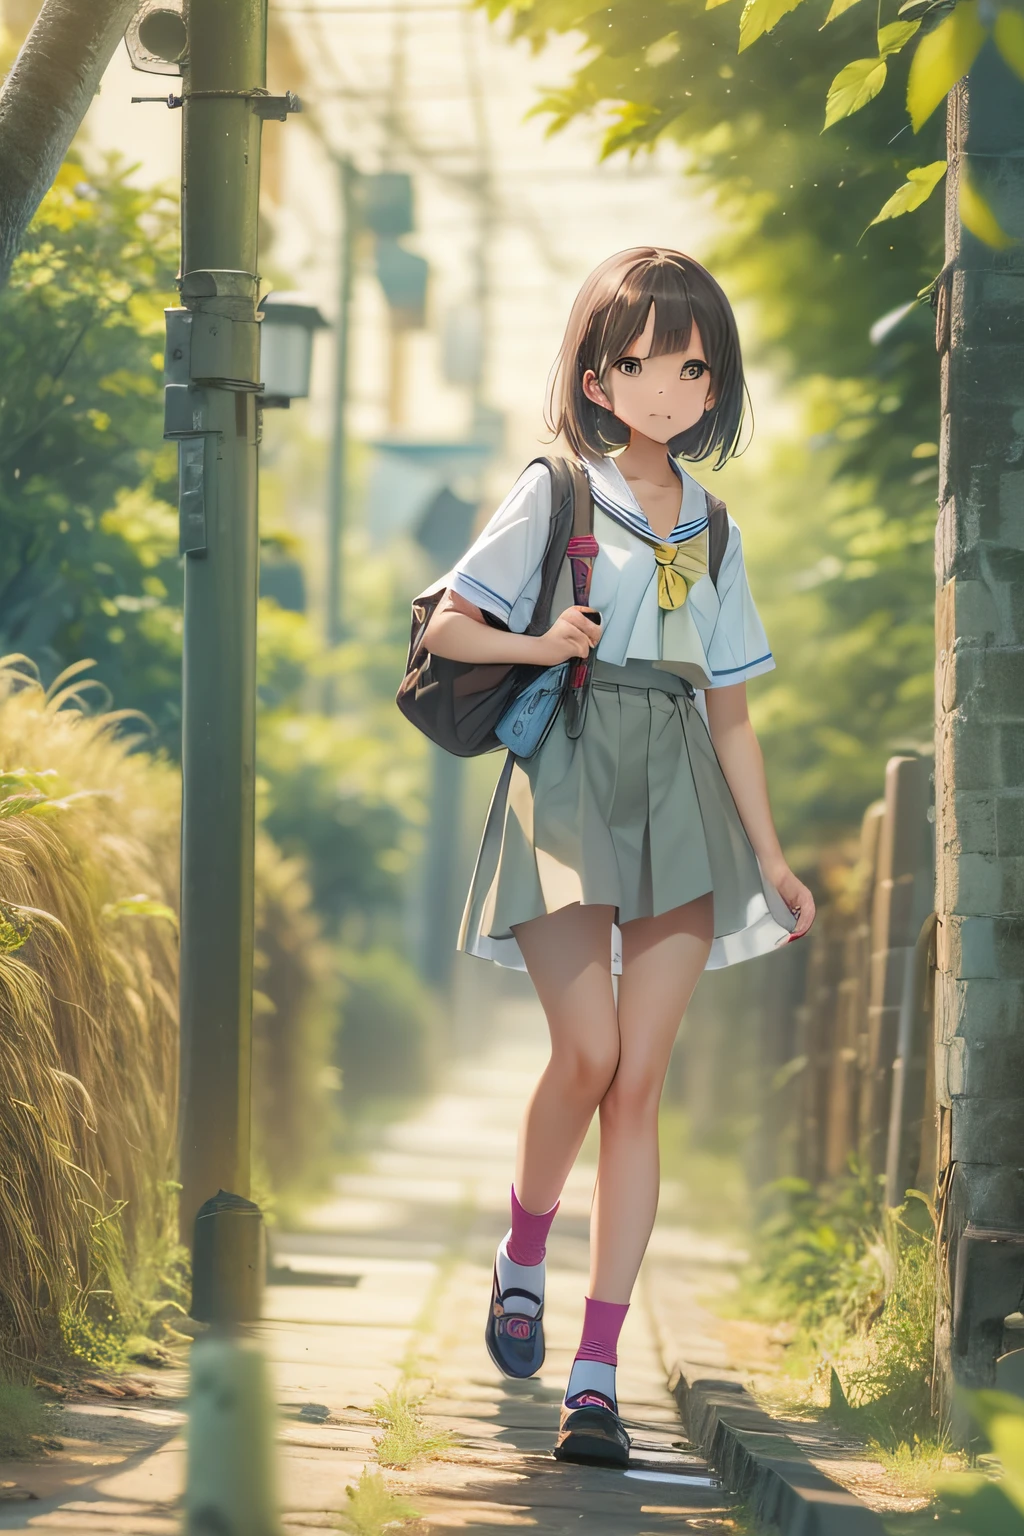 1 High School Girl、summer clothing、Going to school on the rice field road